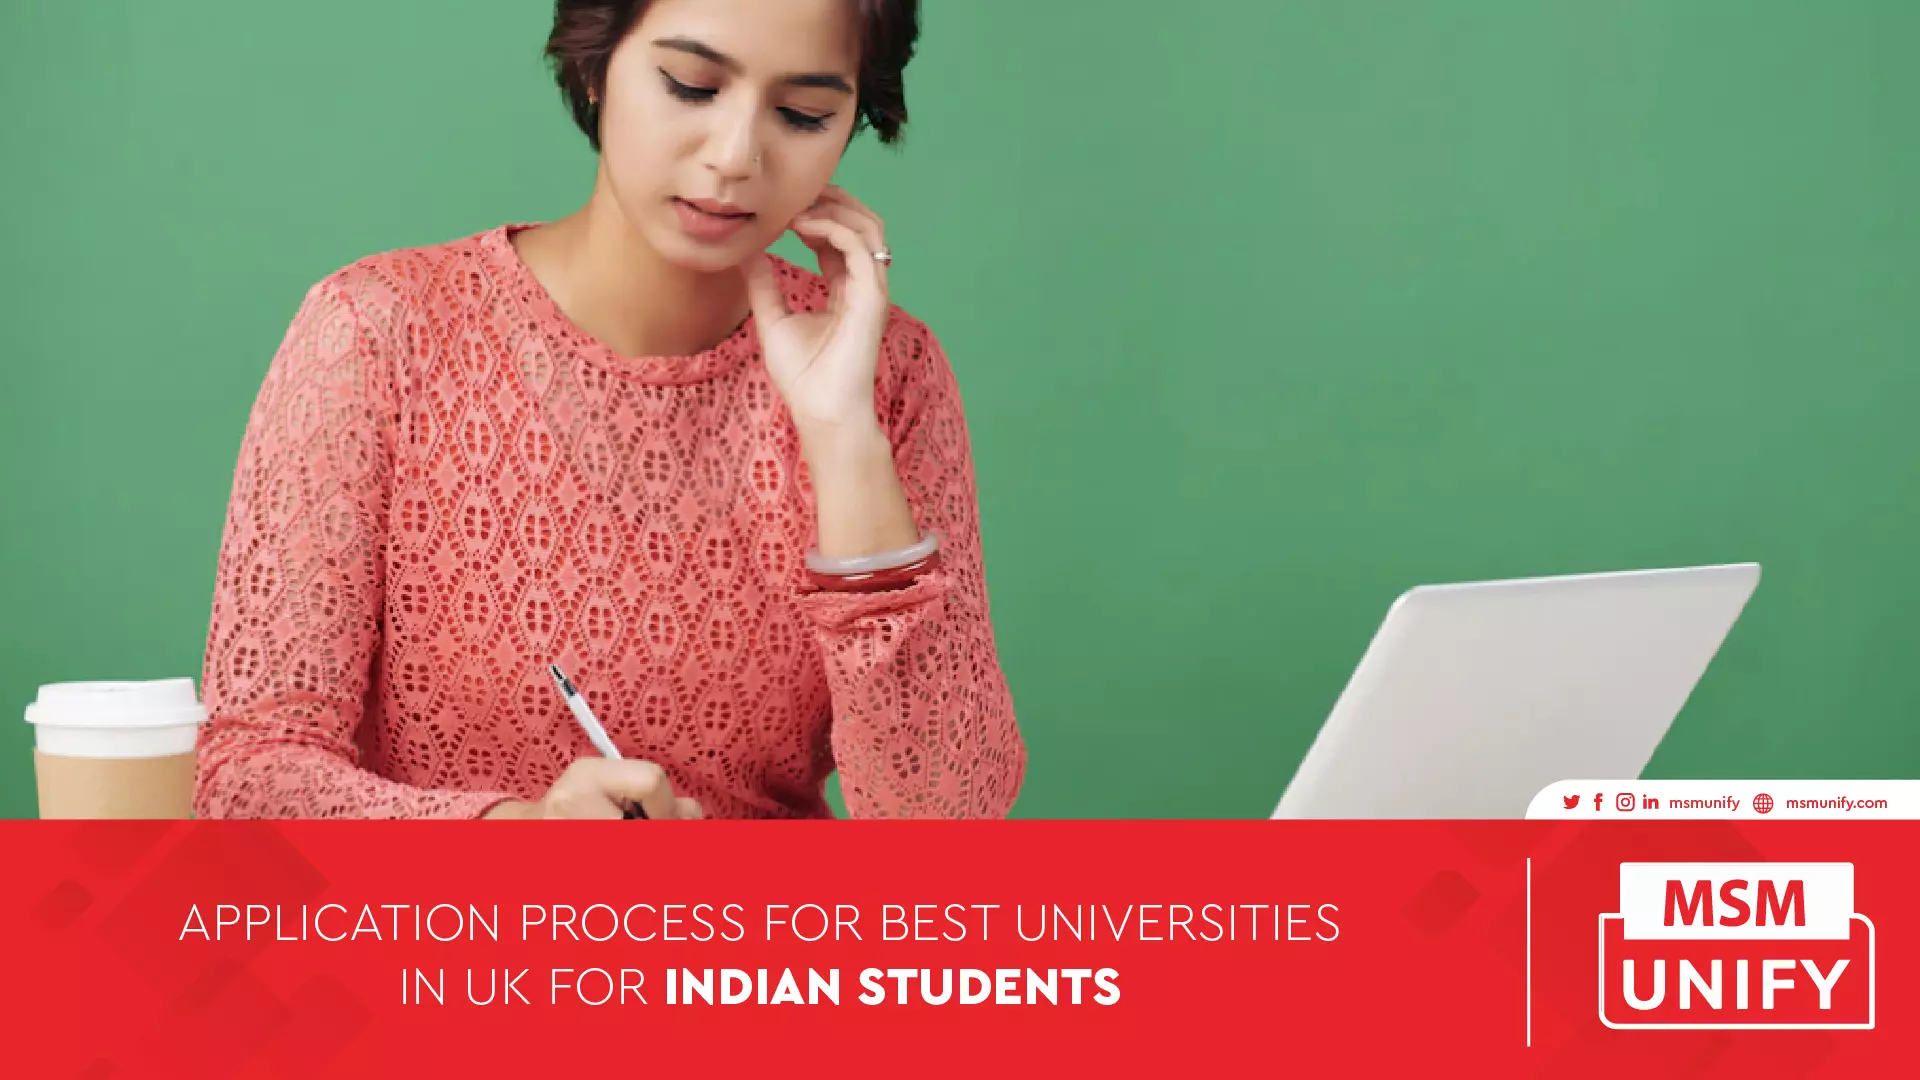 122822 MSM Unify Application procees for best universities in UK for Indian Students 01